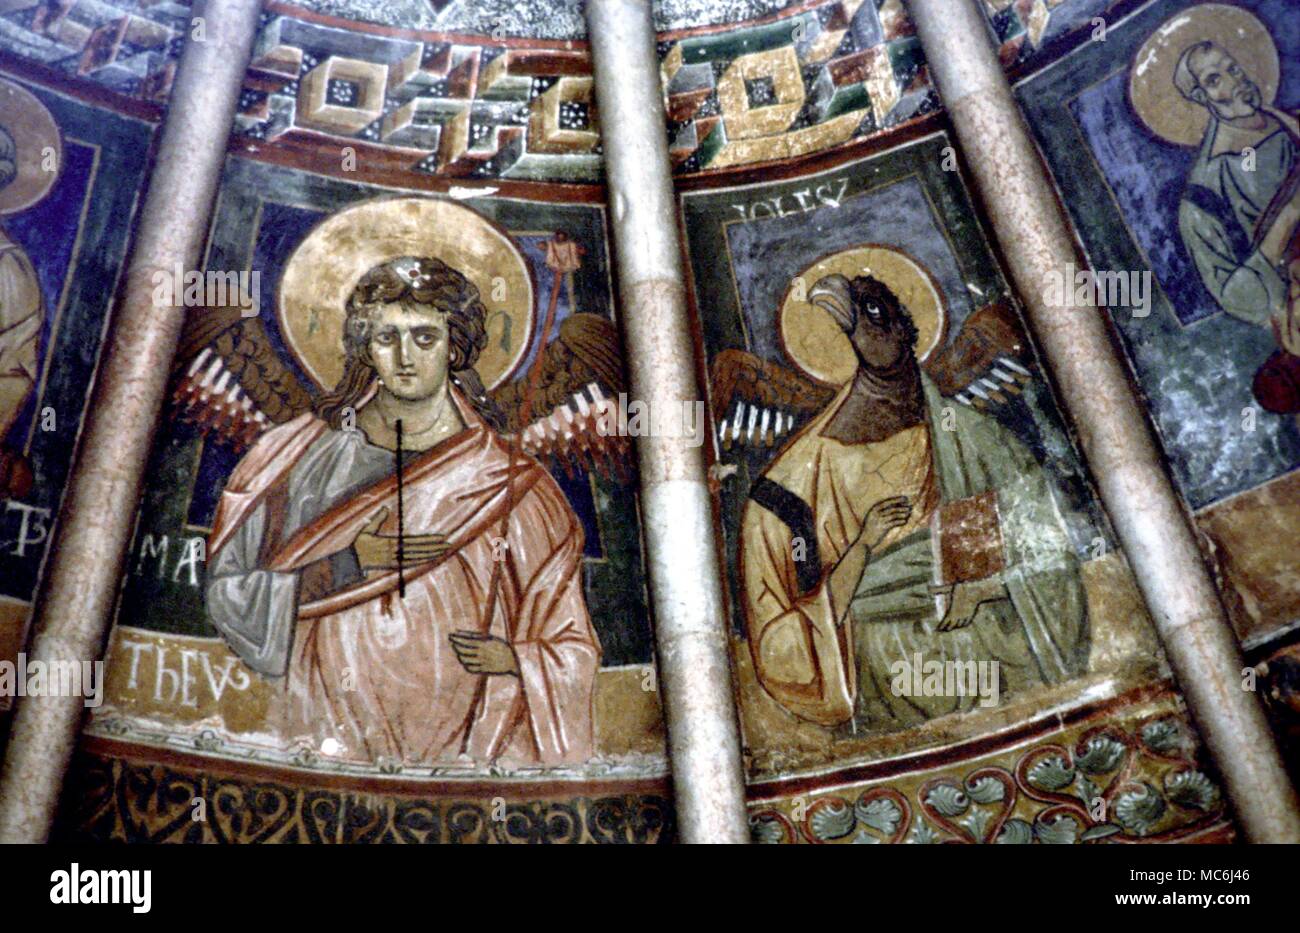 Four Evangelist St Johns Image of St John with the head of an eagle derived from the symbol of the redeemed Scorpio Fresco on the inner dome of the baptistry in Parma Stock Photo